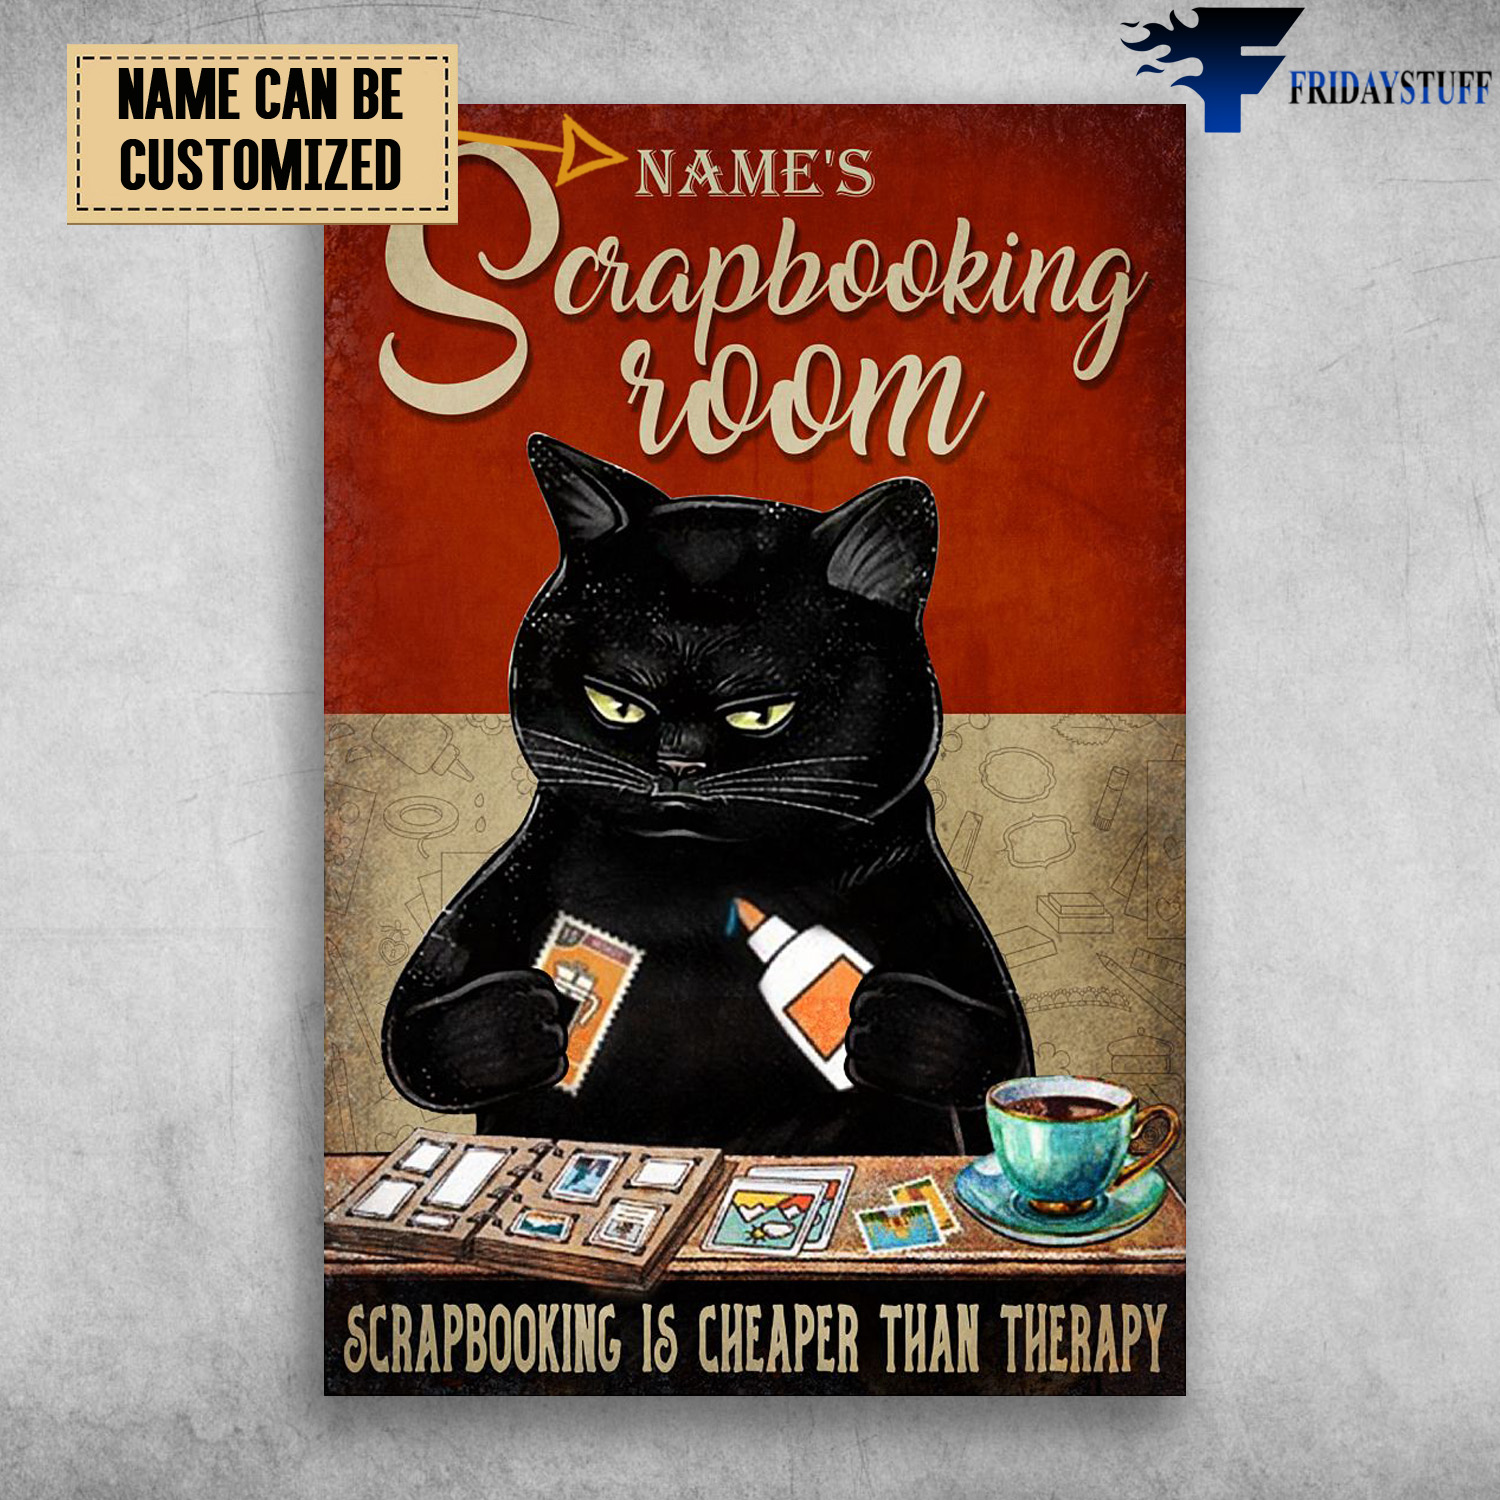 Black Cat Scrapbooking, Scrapbooking Room, Scrapbooking Is Cheaper Than Therapy